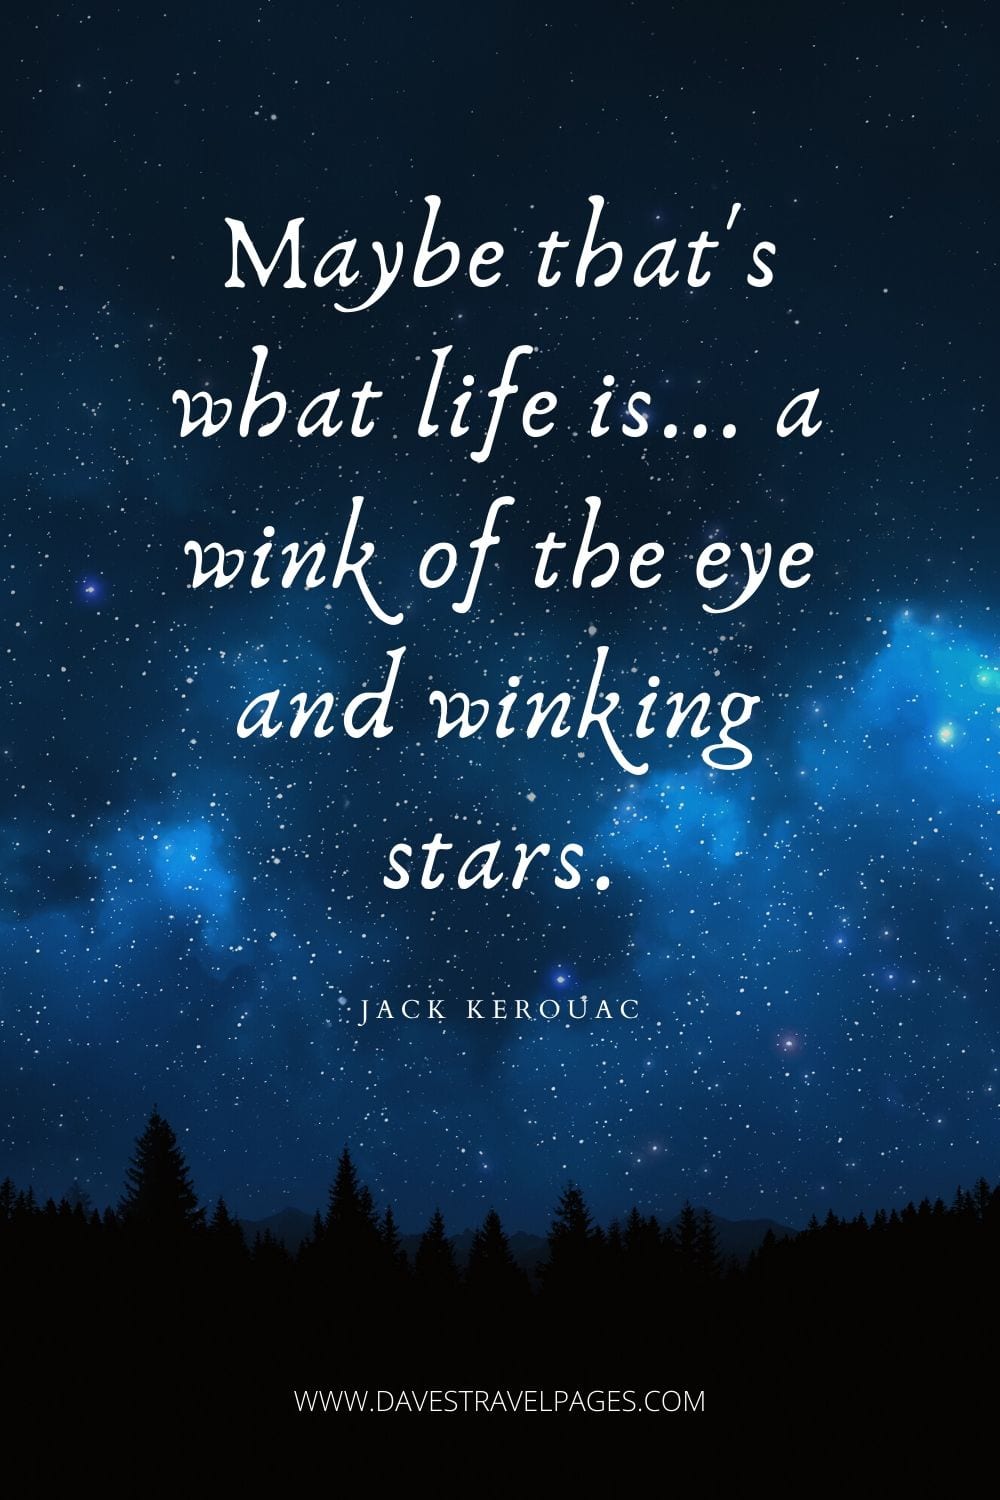 “Maybe that's what life is... a wink of the eye and winking stars. ” Jack Kerouac Wisdom